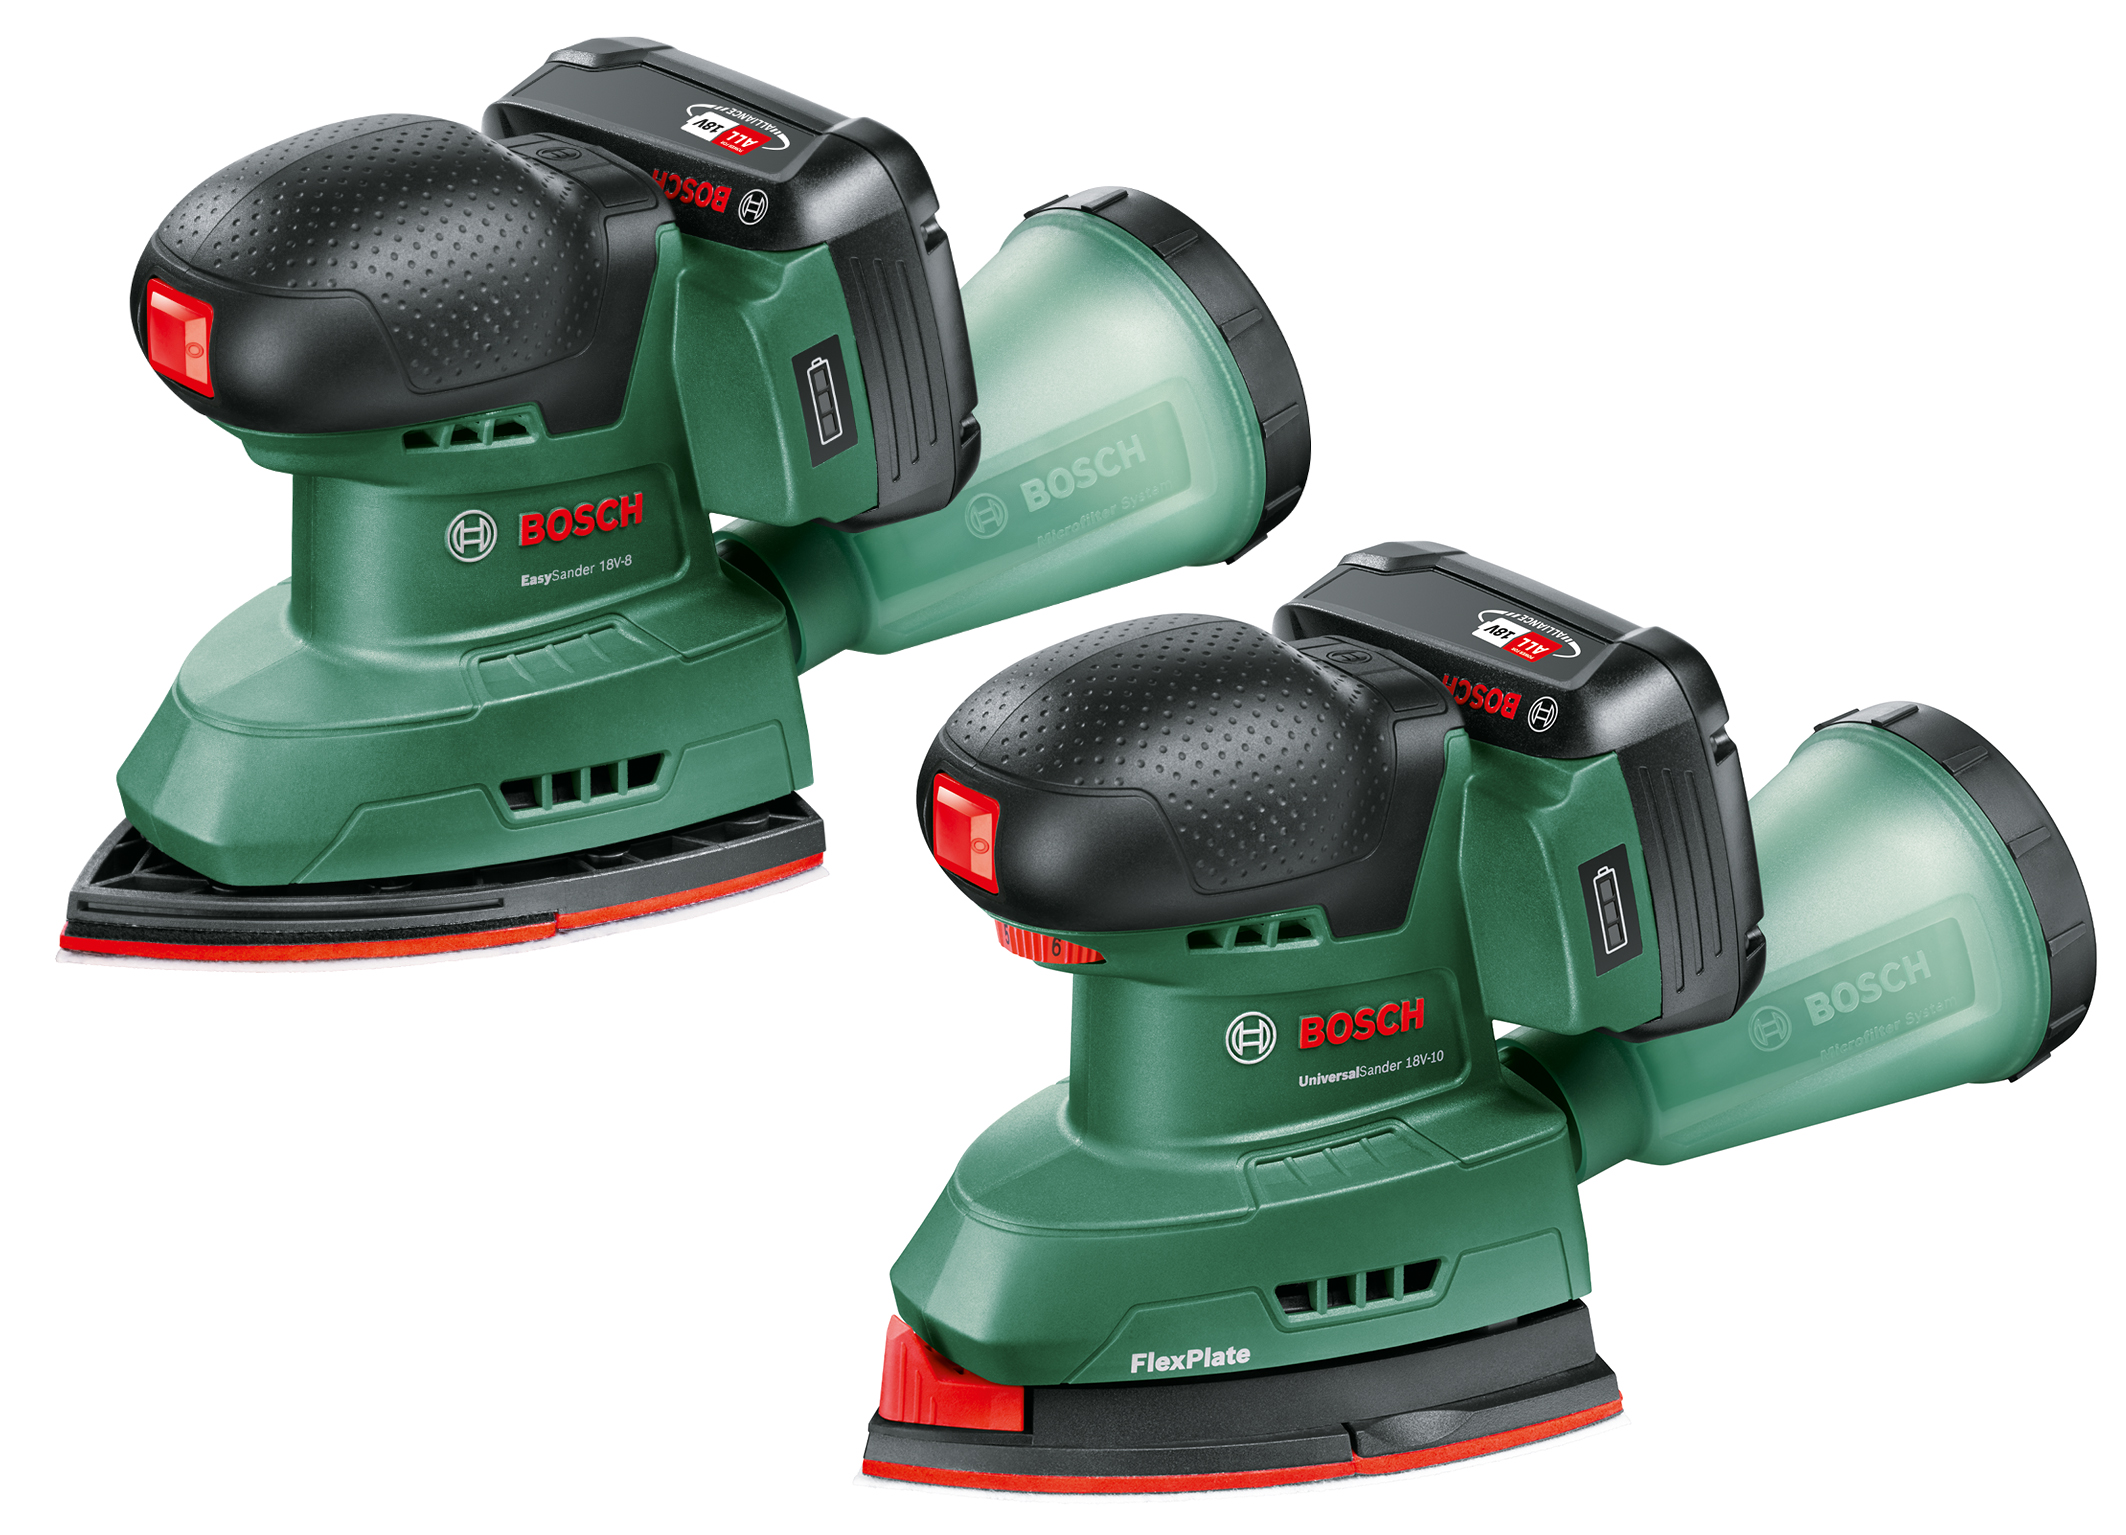 Additions to the ‘18V Power for All System’: Two new multi-sanders from Bosch for DIYers